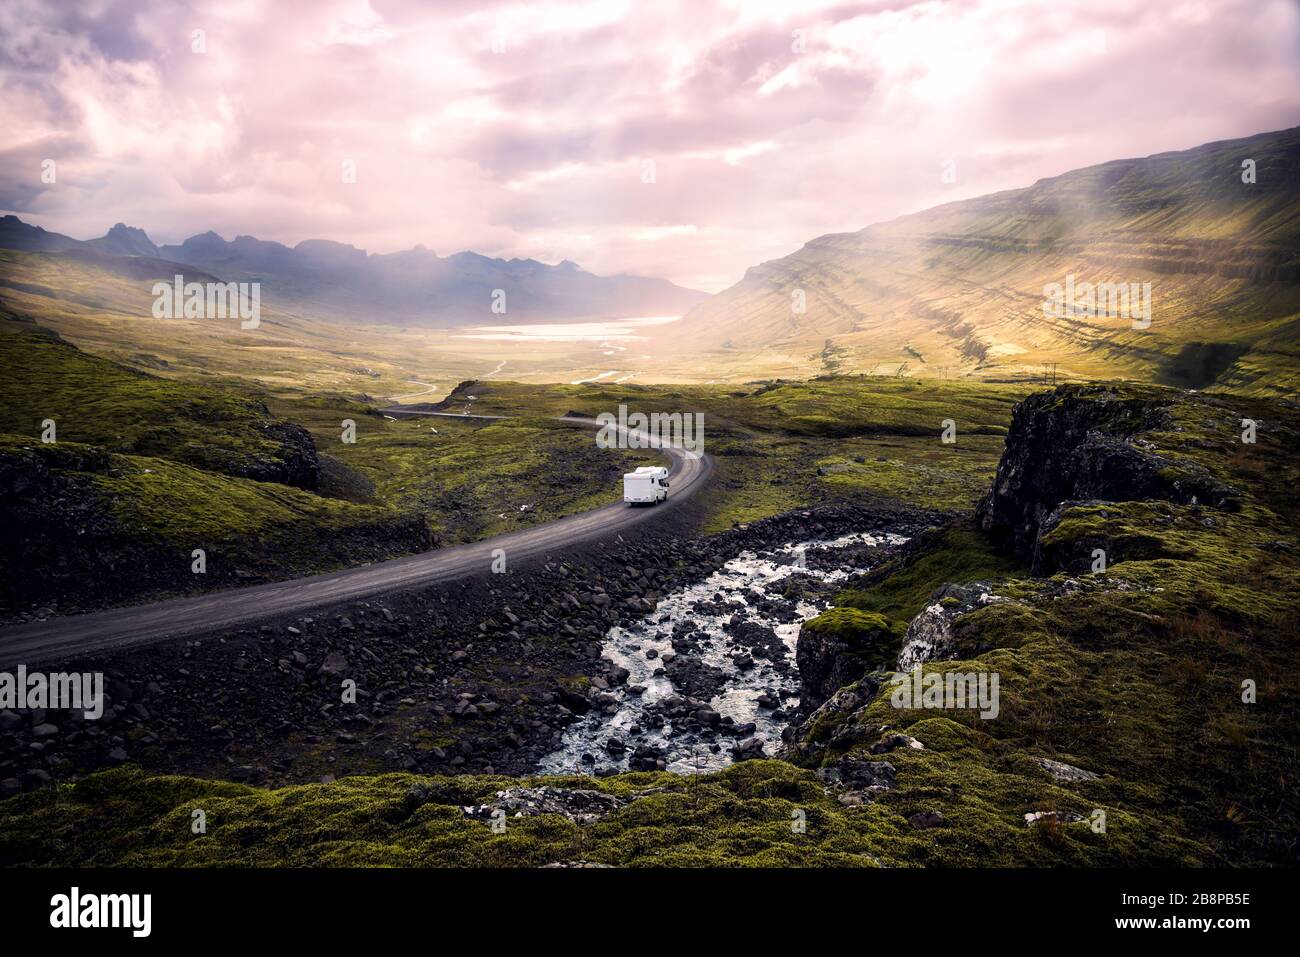 white camper van driving along winding mountain road through beautiful sunlit valley surrounded by mountains, Iceland Stock Photo